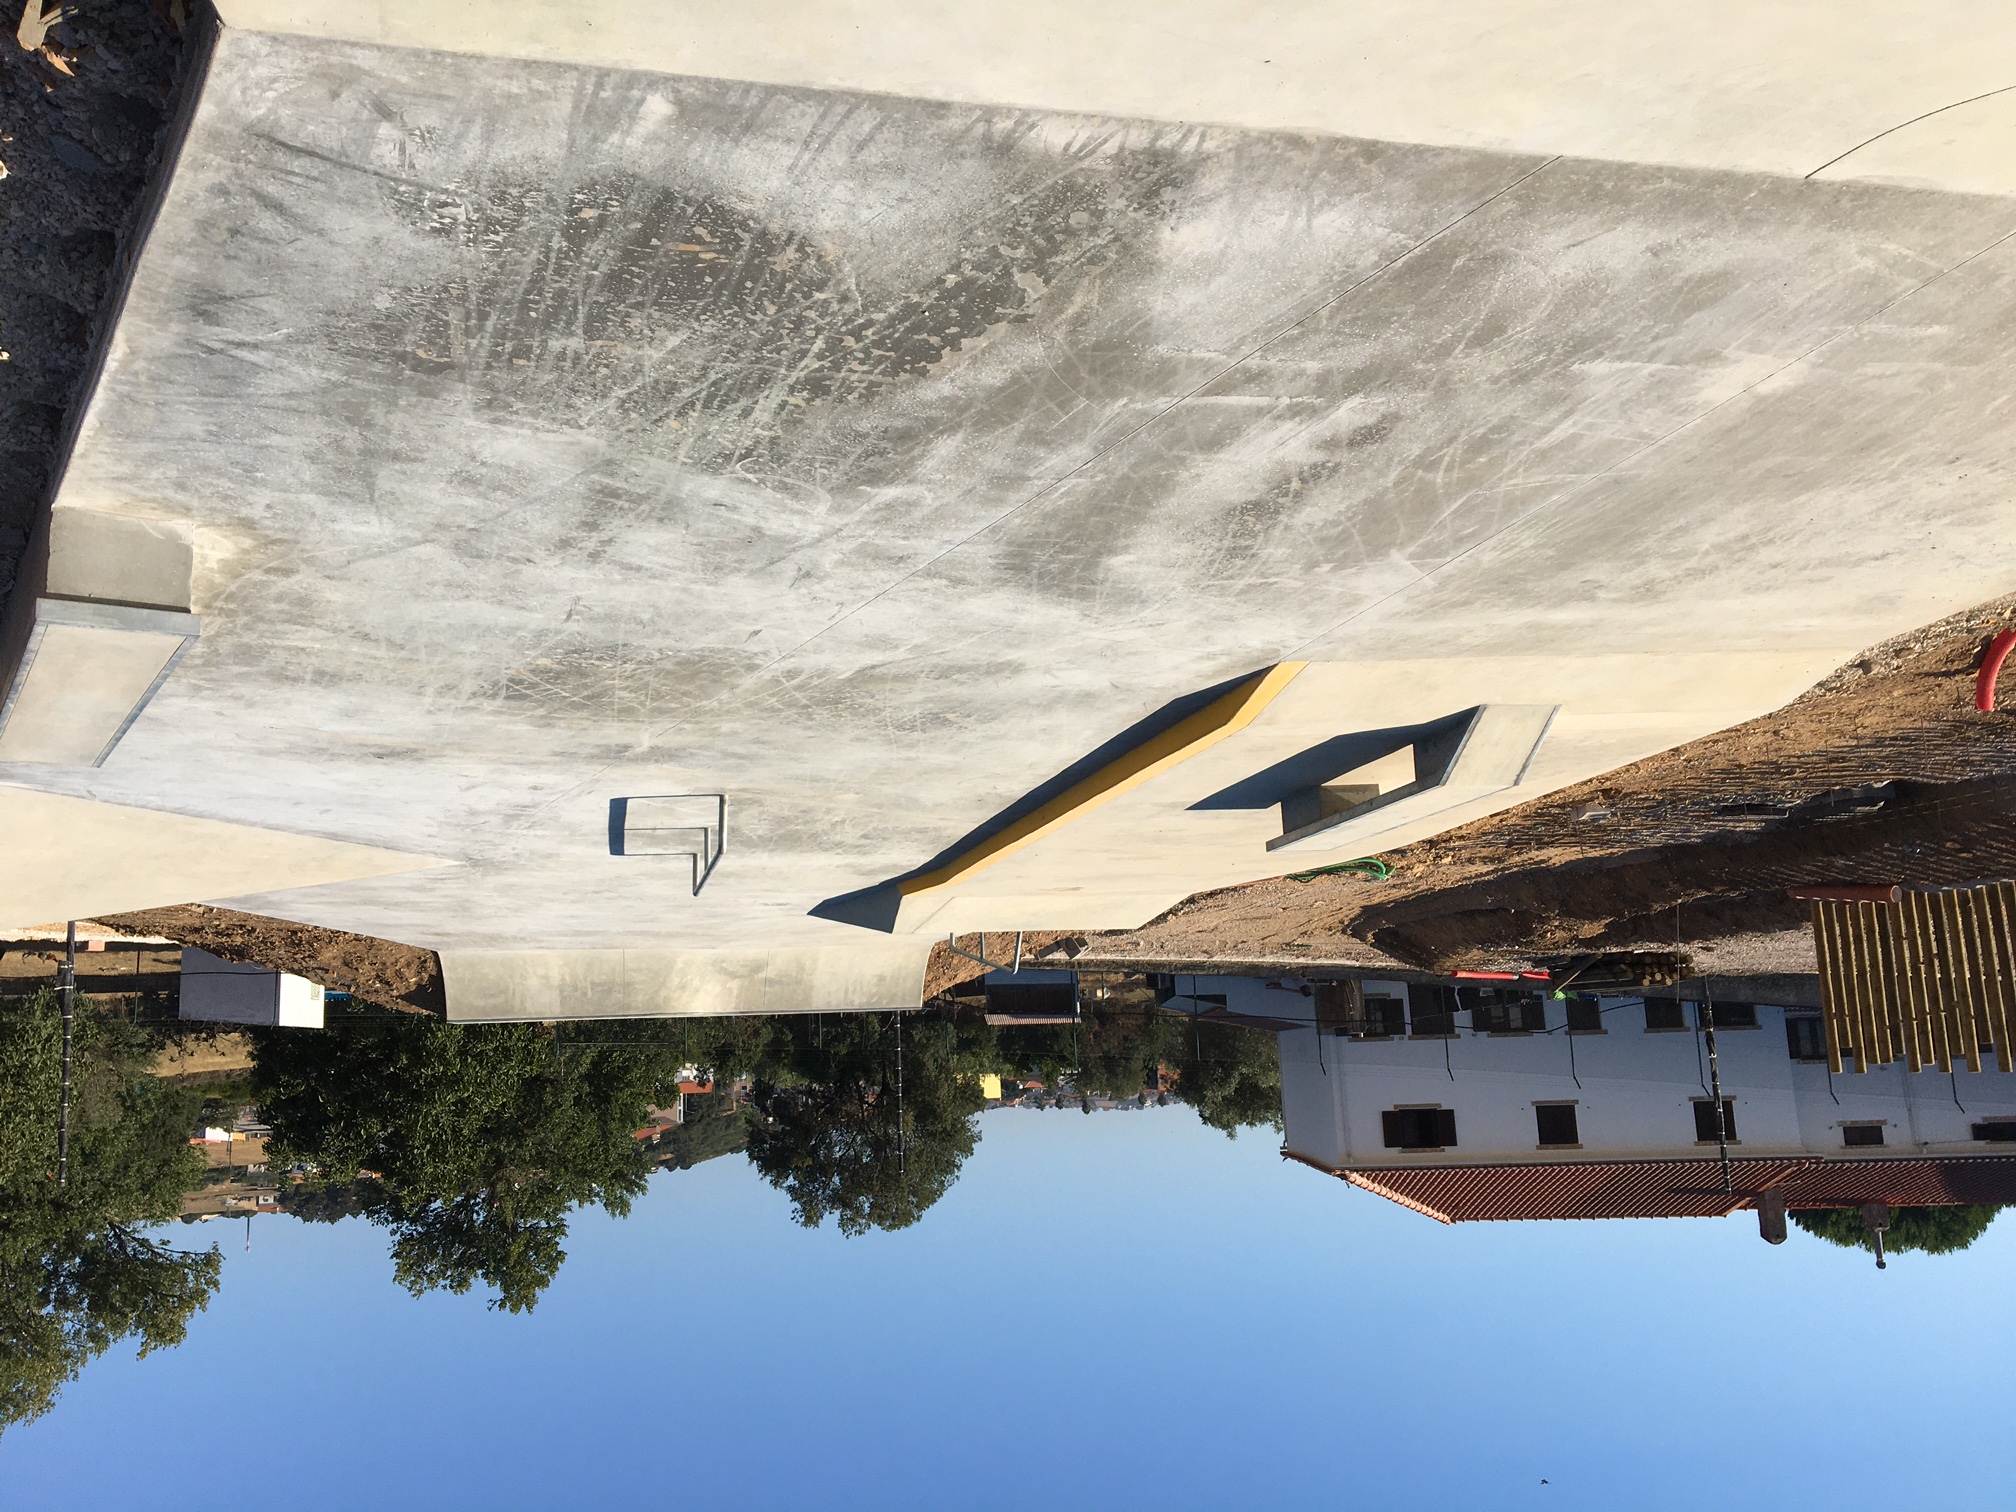 The New Mafra skatepark in Portugal is almost ready